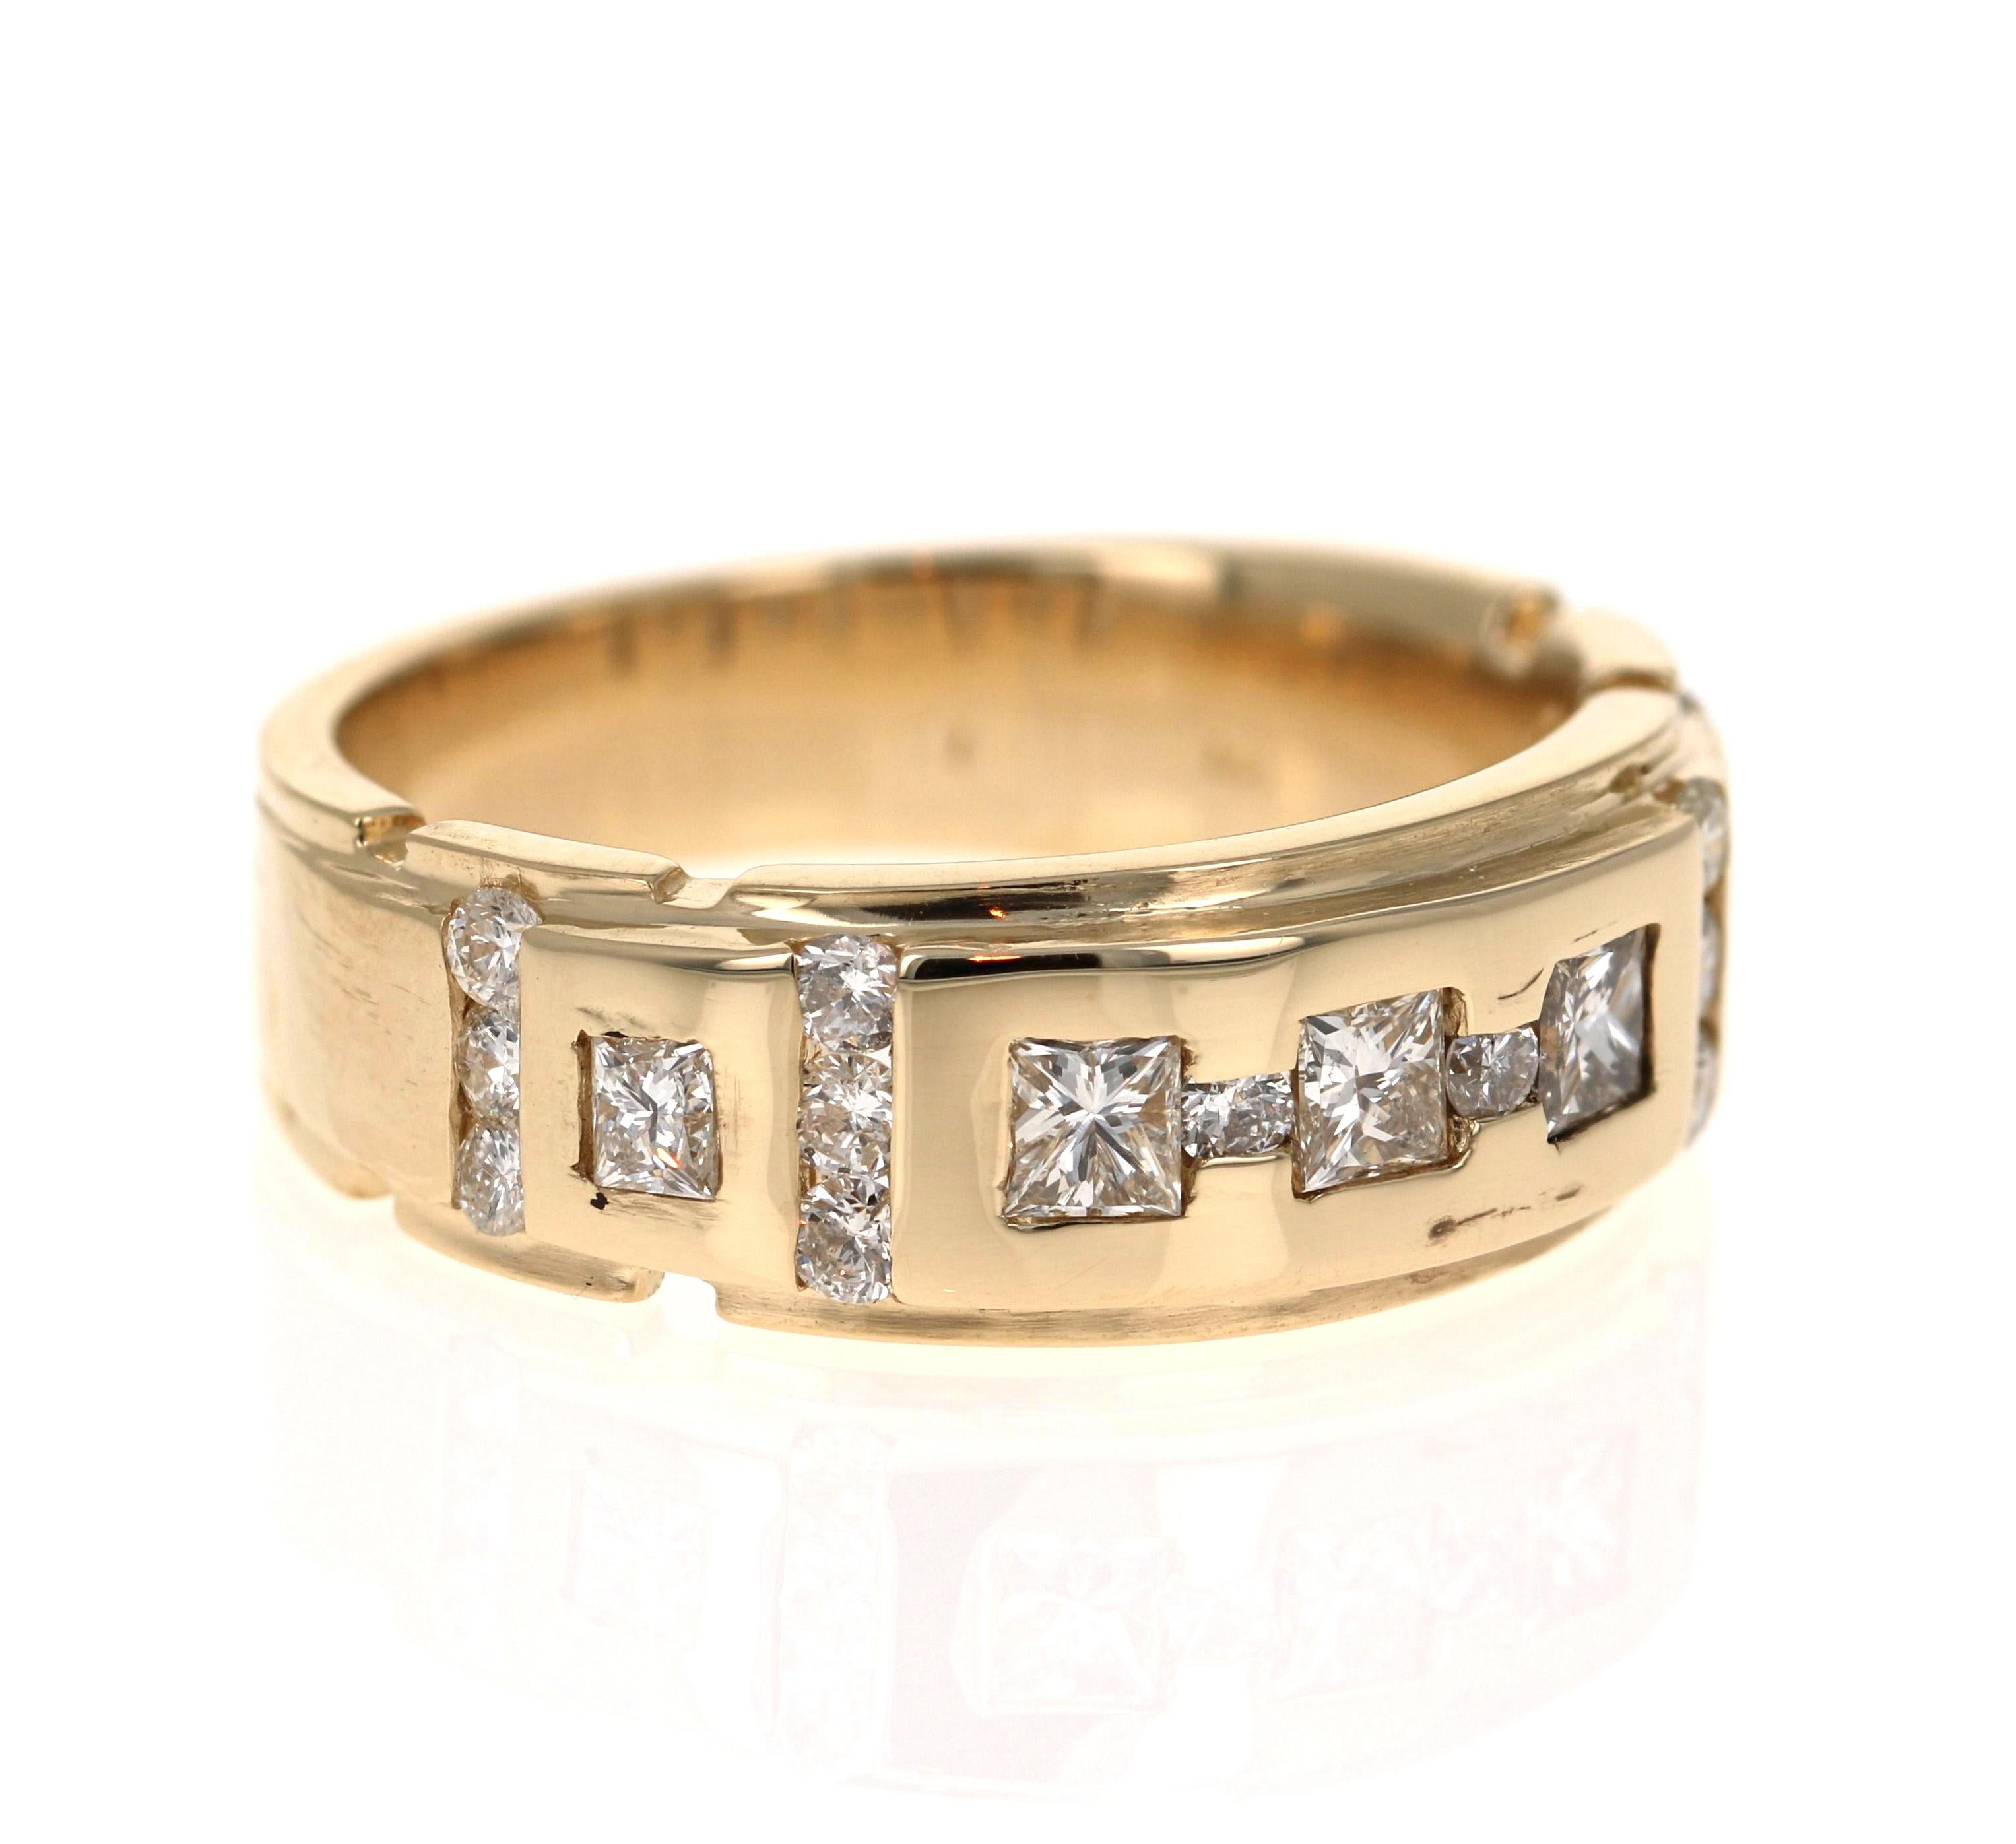 We have a Men's Collection of Fine Jewelry!  Beautiful, Bold, Masculine and Simple Men's Wedding Rings/Bands. 

This Men's Band has 14 Round Cut Diamonds that weigh 0.45 Carats and 5 Princess Cut Diamonds that weigh 0.60 Carats.  The total carat